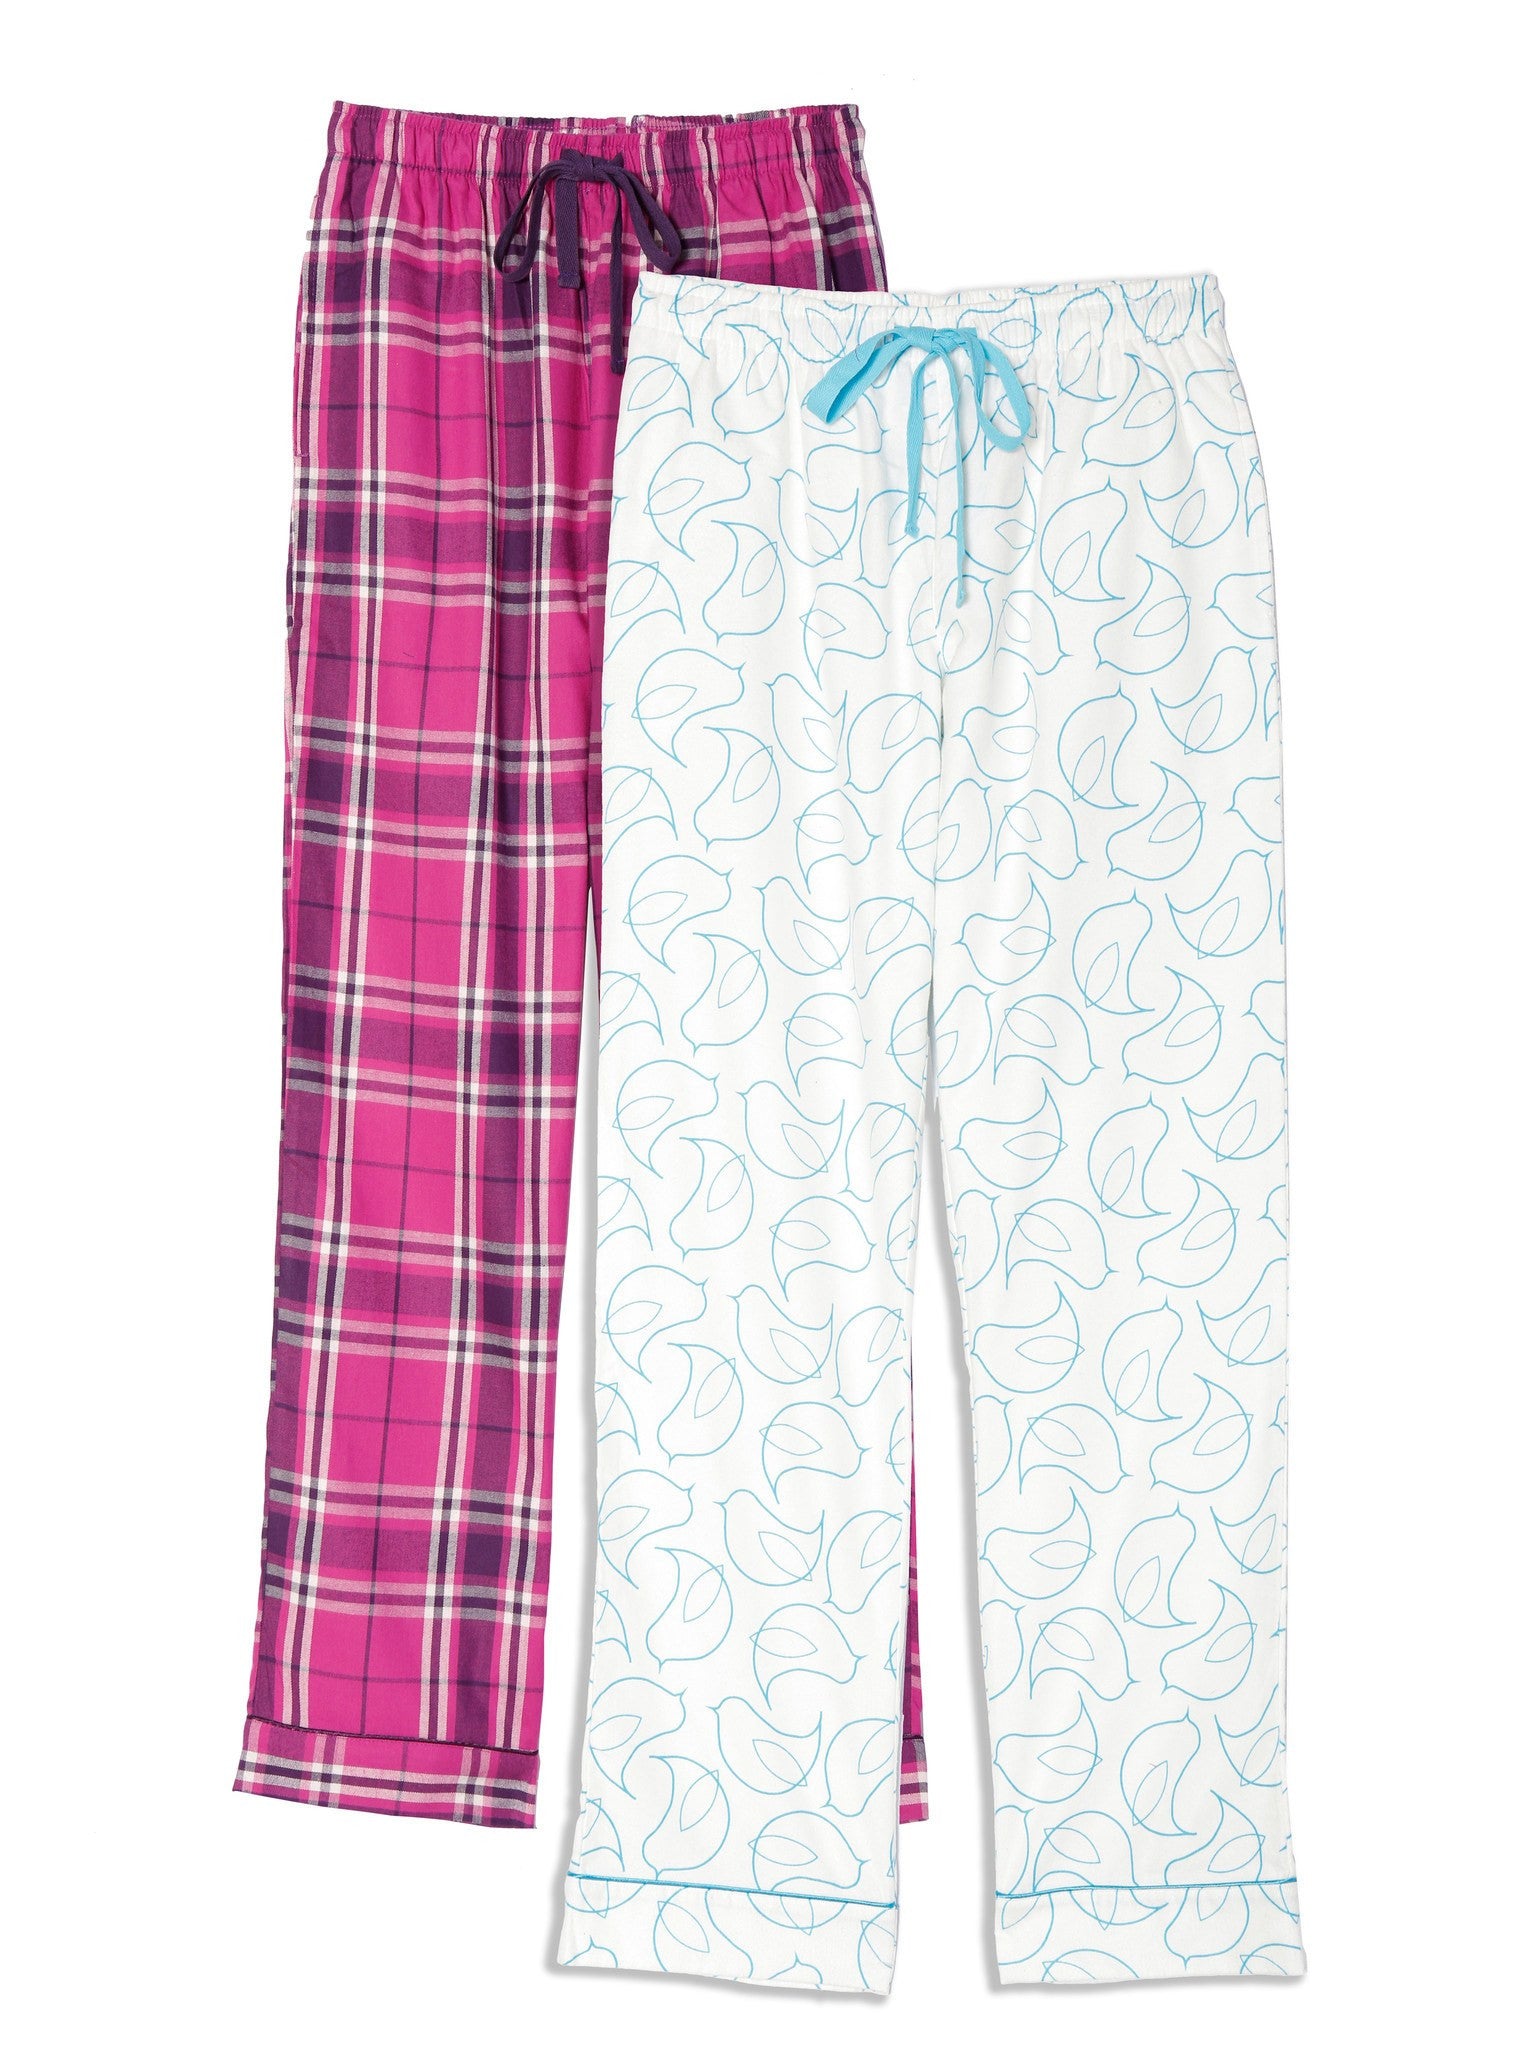 Women's Cotton Flannel Lounge Pants (2 Pack) - Relaxed Fit